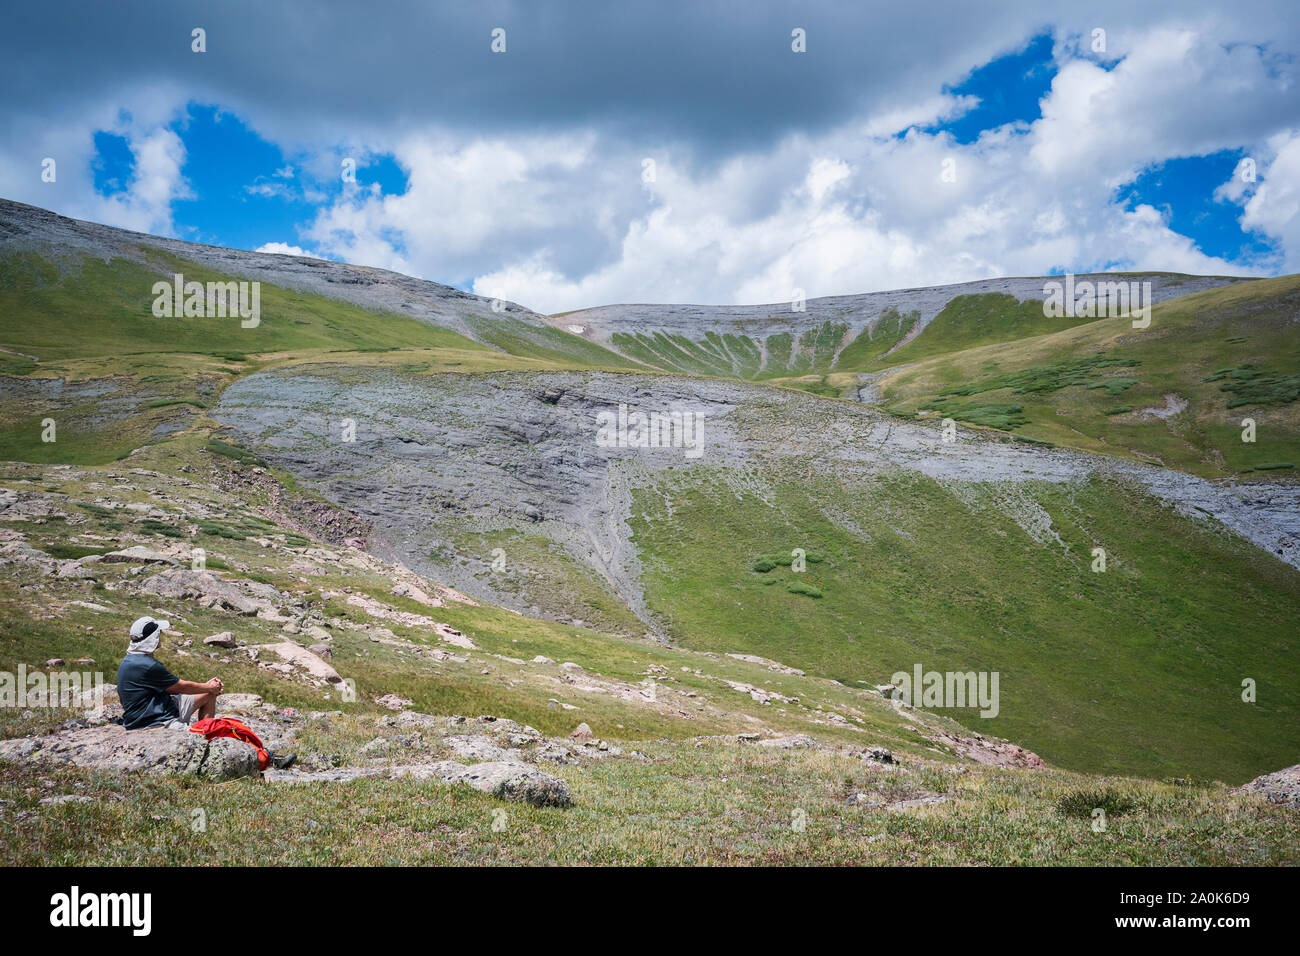 Senior adult man sits on a rock to take a rest break while hiking above tree line in the San Juan Mountains on a cloudy summer day, Weminuche Wilderne Stock Photo